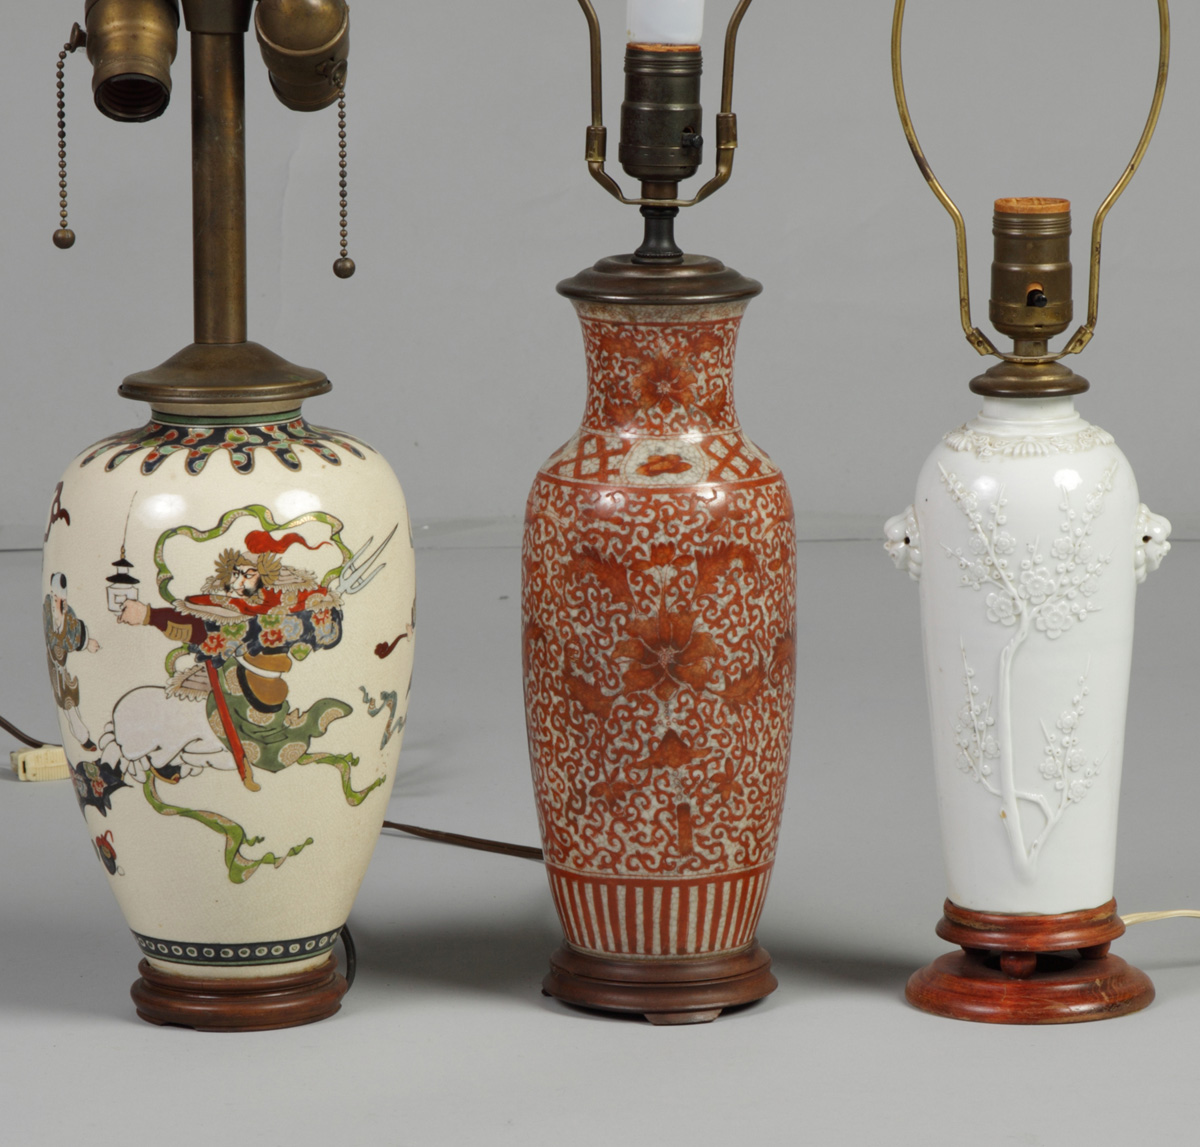 3 Oriental Lamp Bases One on left 1350d6